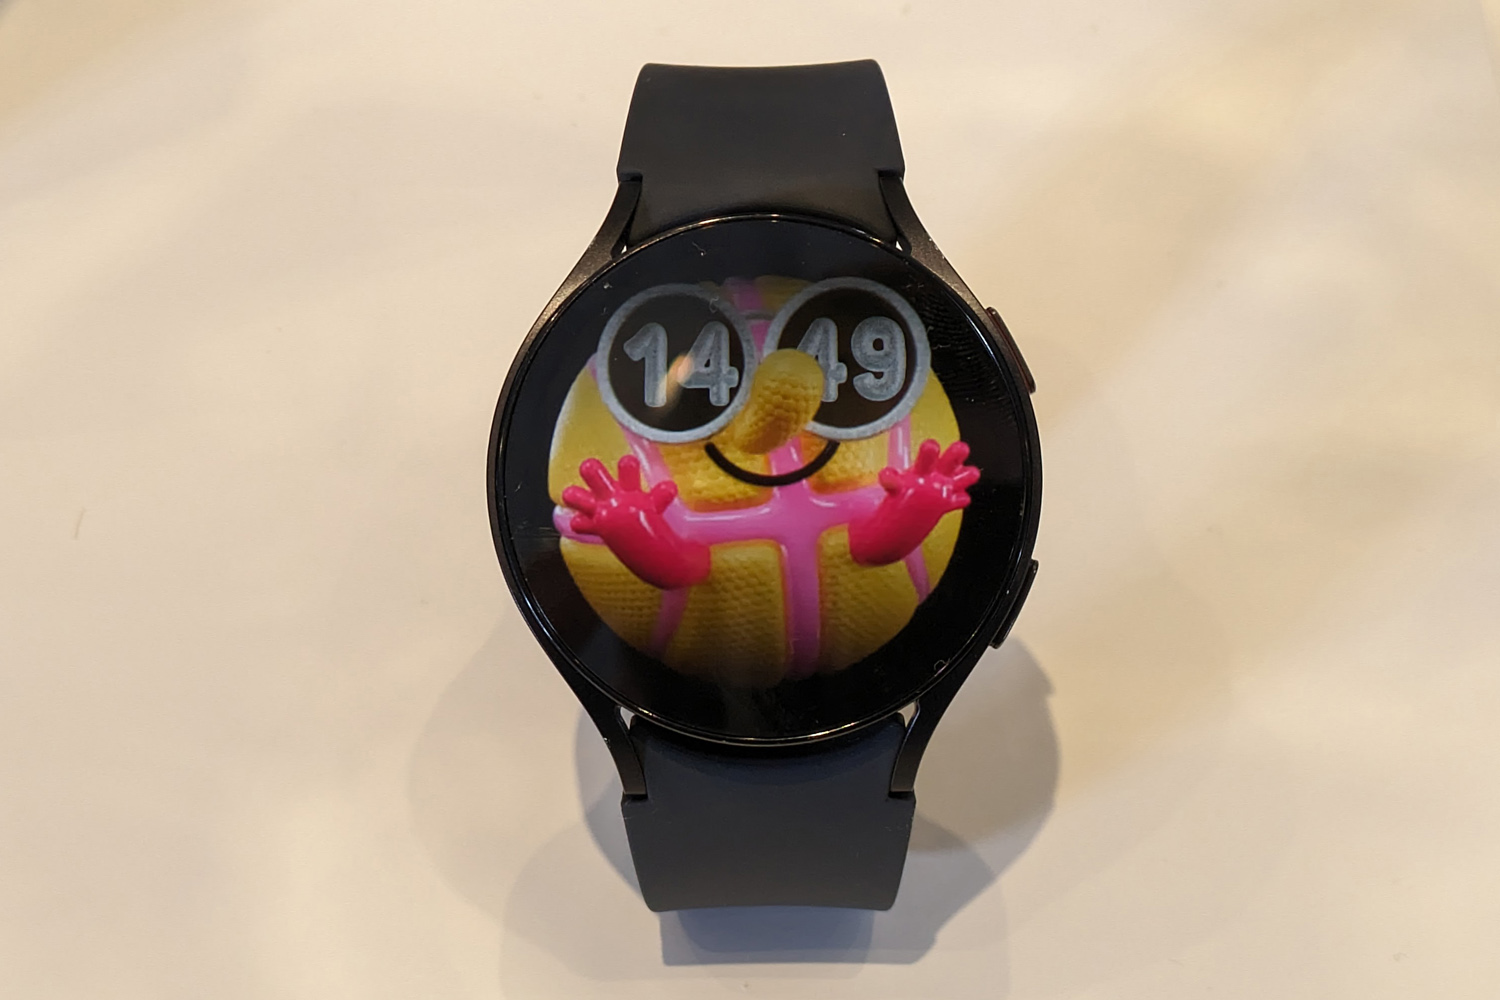 Samsung Galaxy Watch 6 hands-on funny face watchface